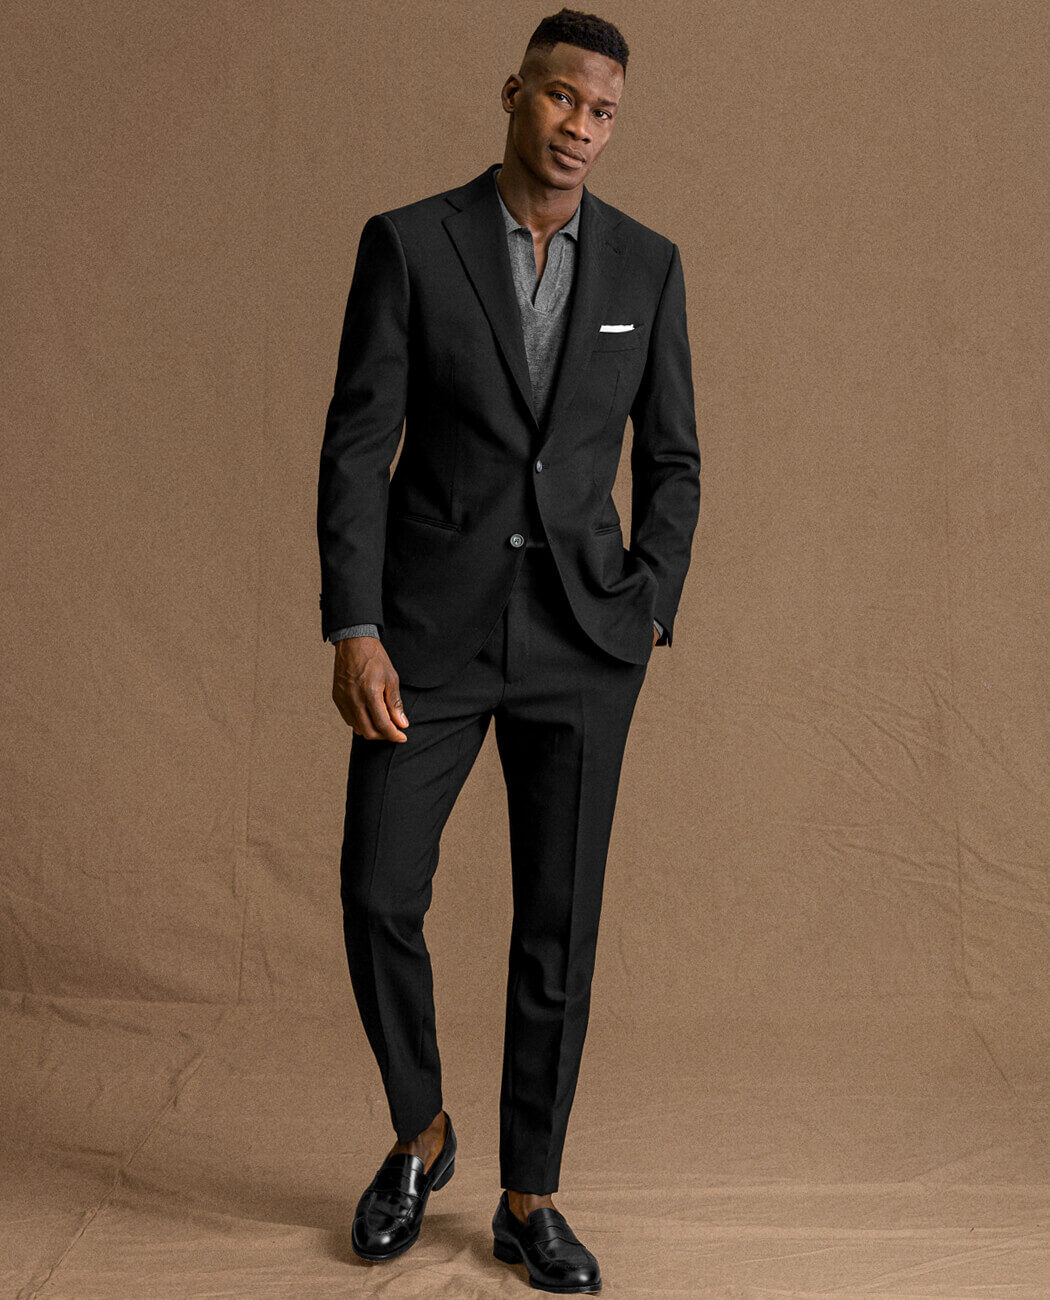 Look: The Non-Formal Black Suit